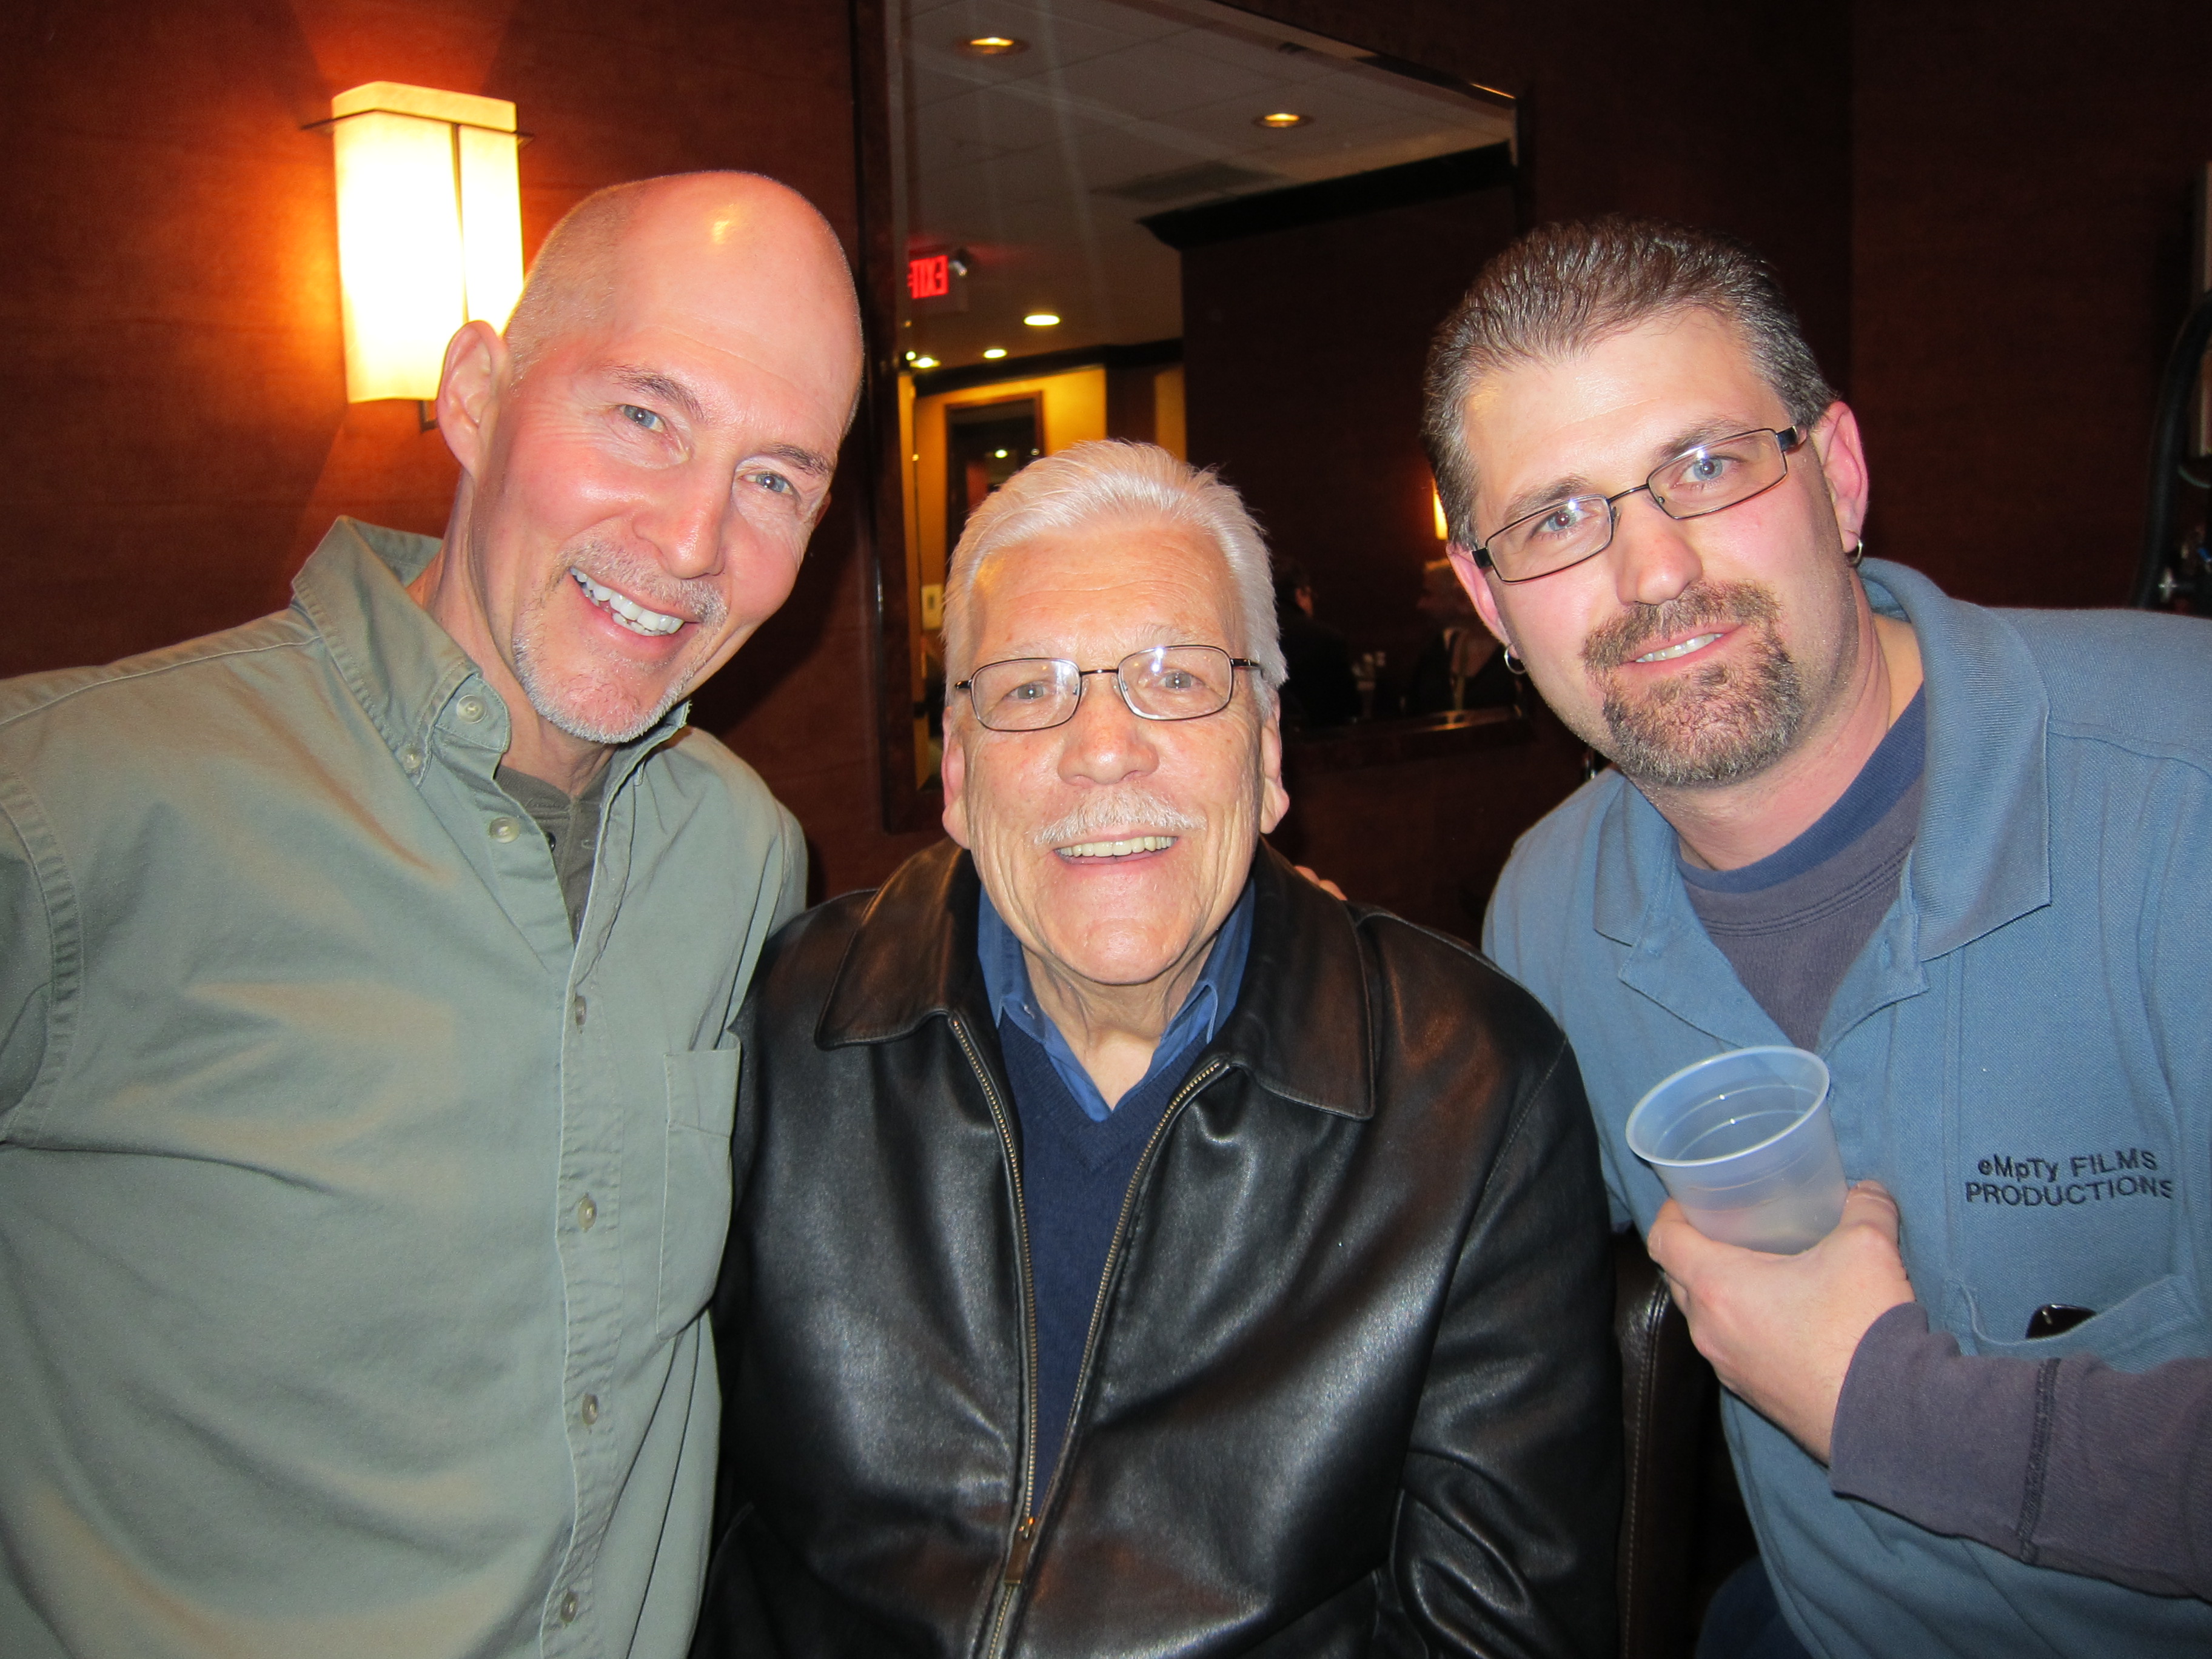 After party, Ray O'Neill, Tom Atkins & Mike Trivisonno, 2012